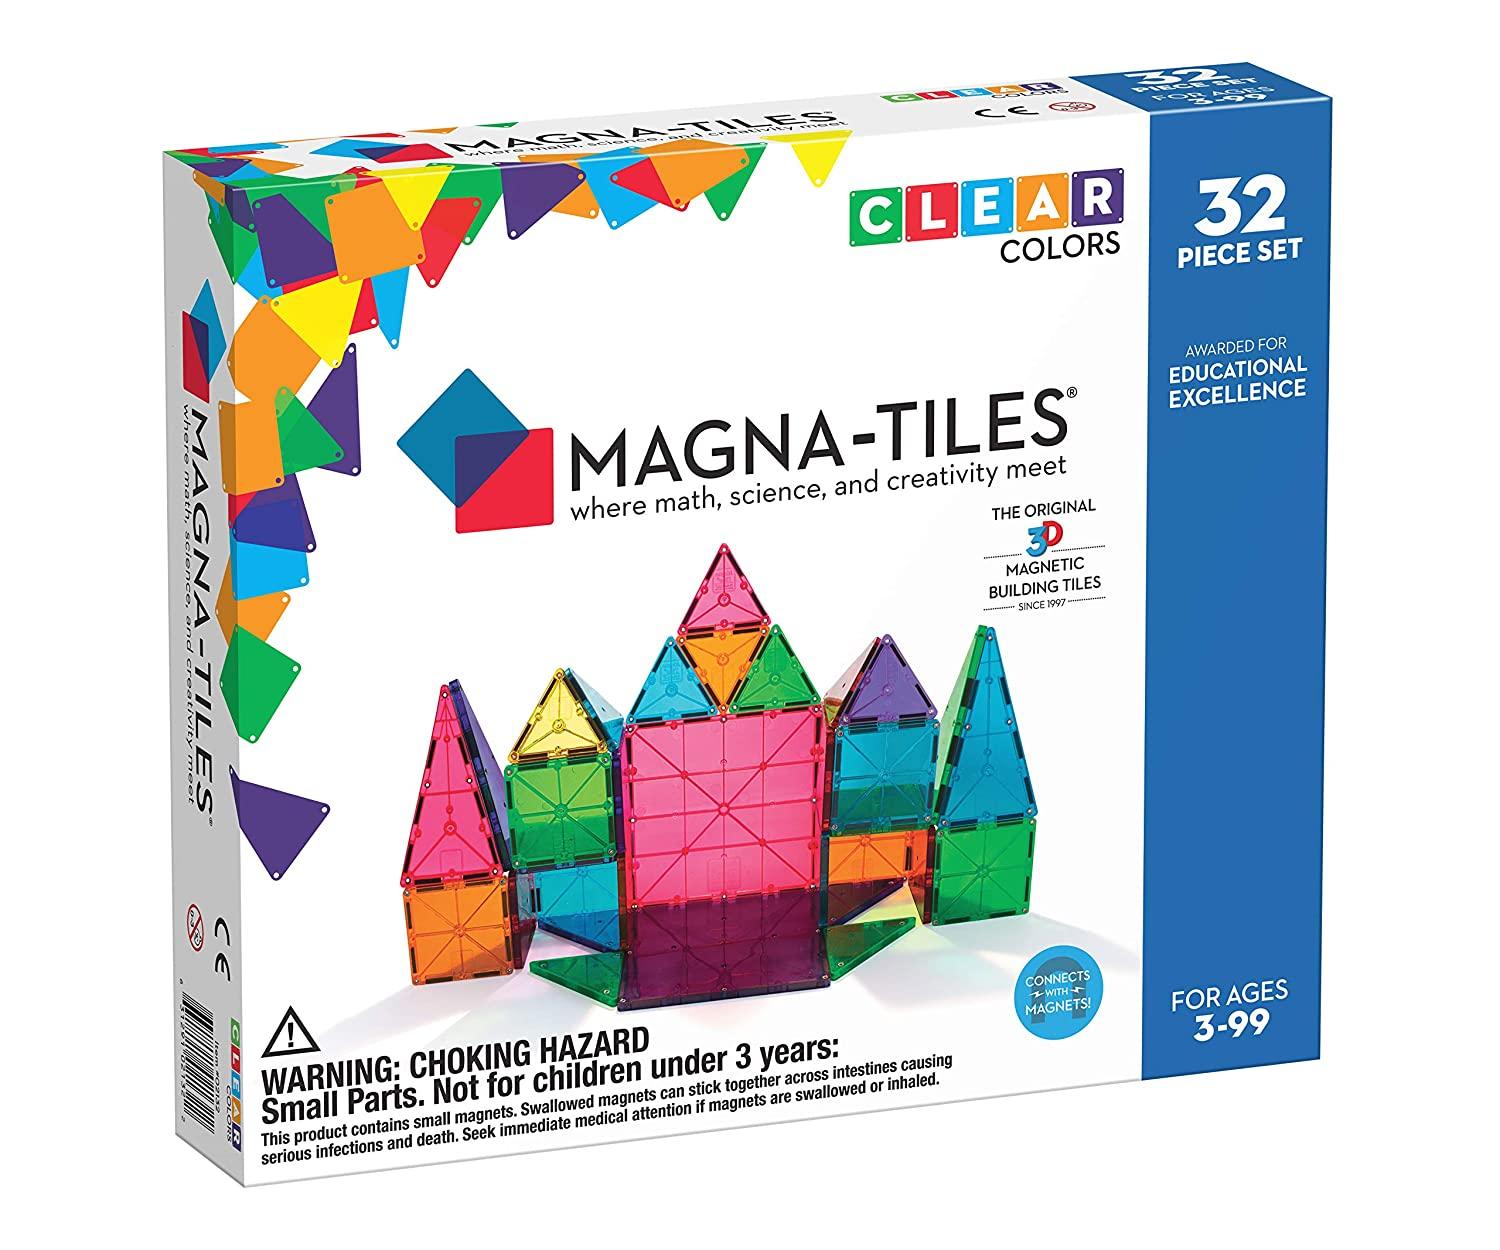 Magna-Tiles 32-Piece Clear Colors Set for $28.99 Shipped